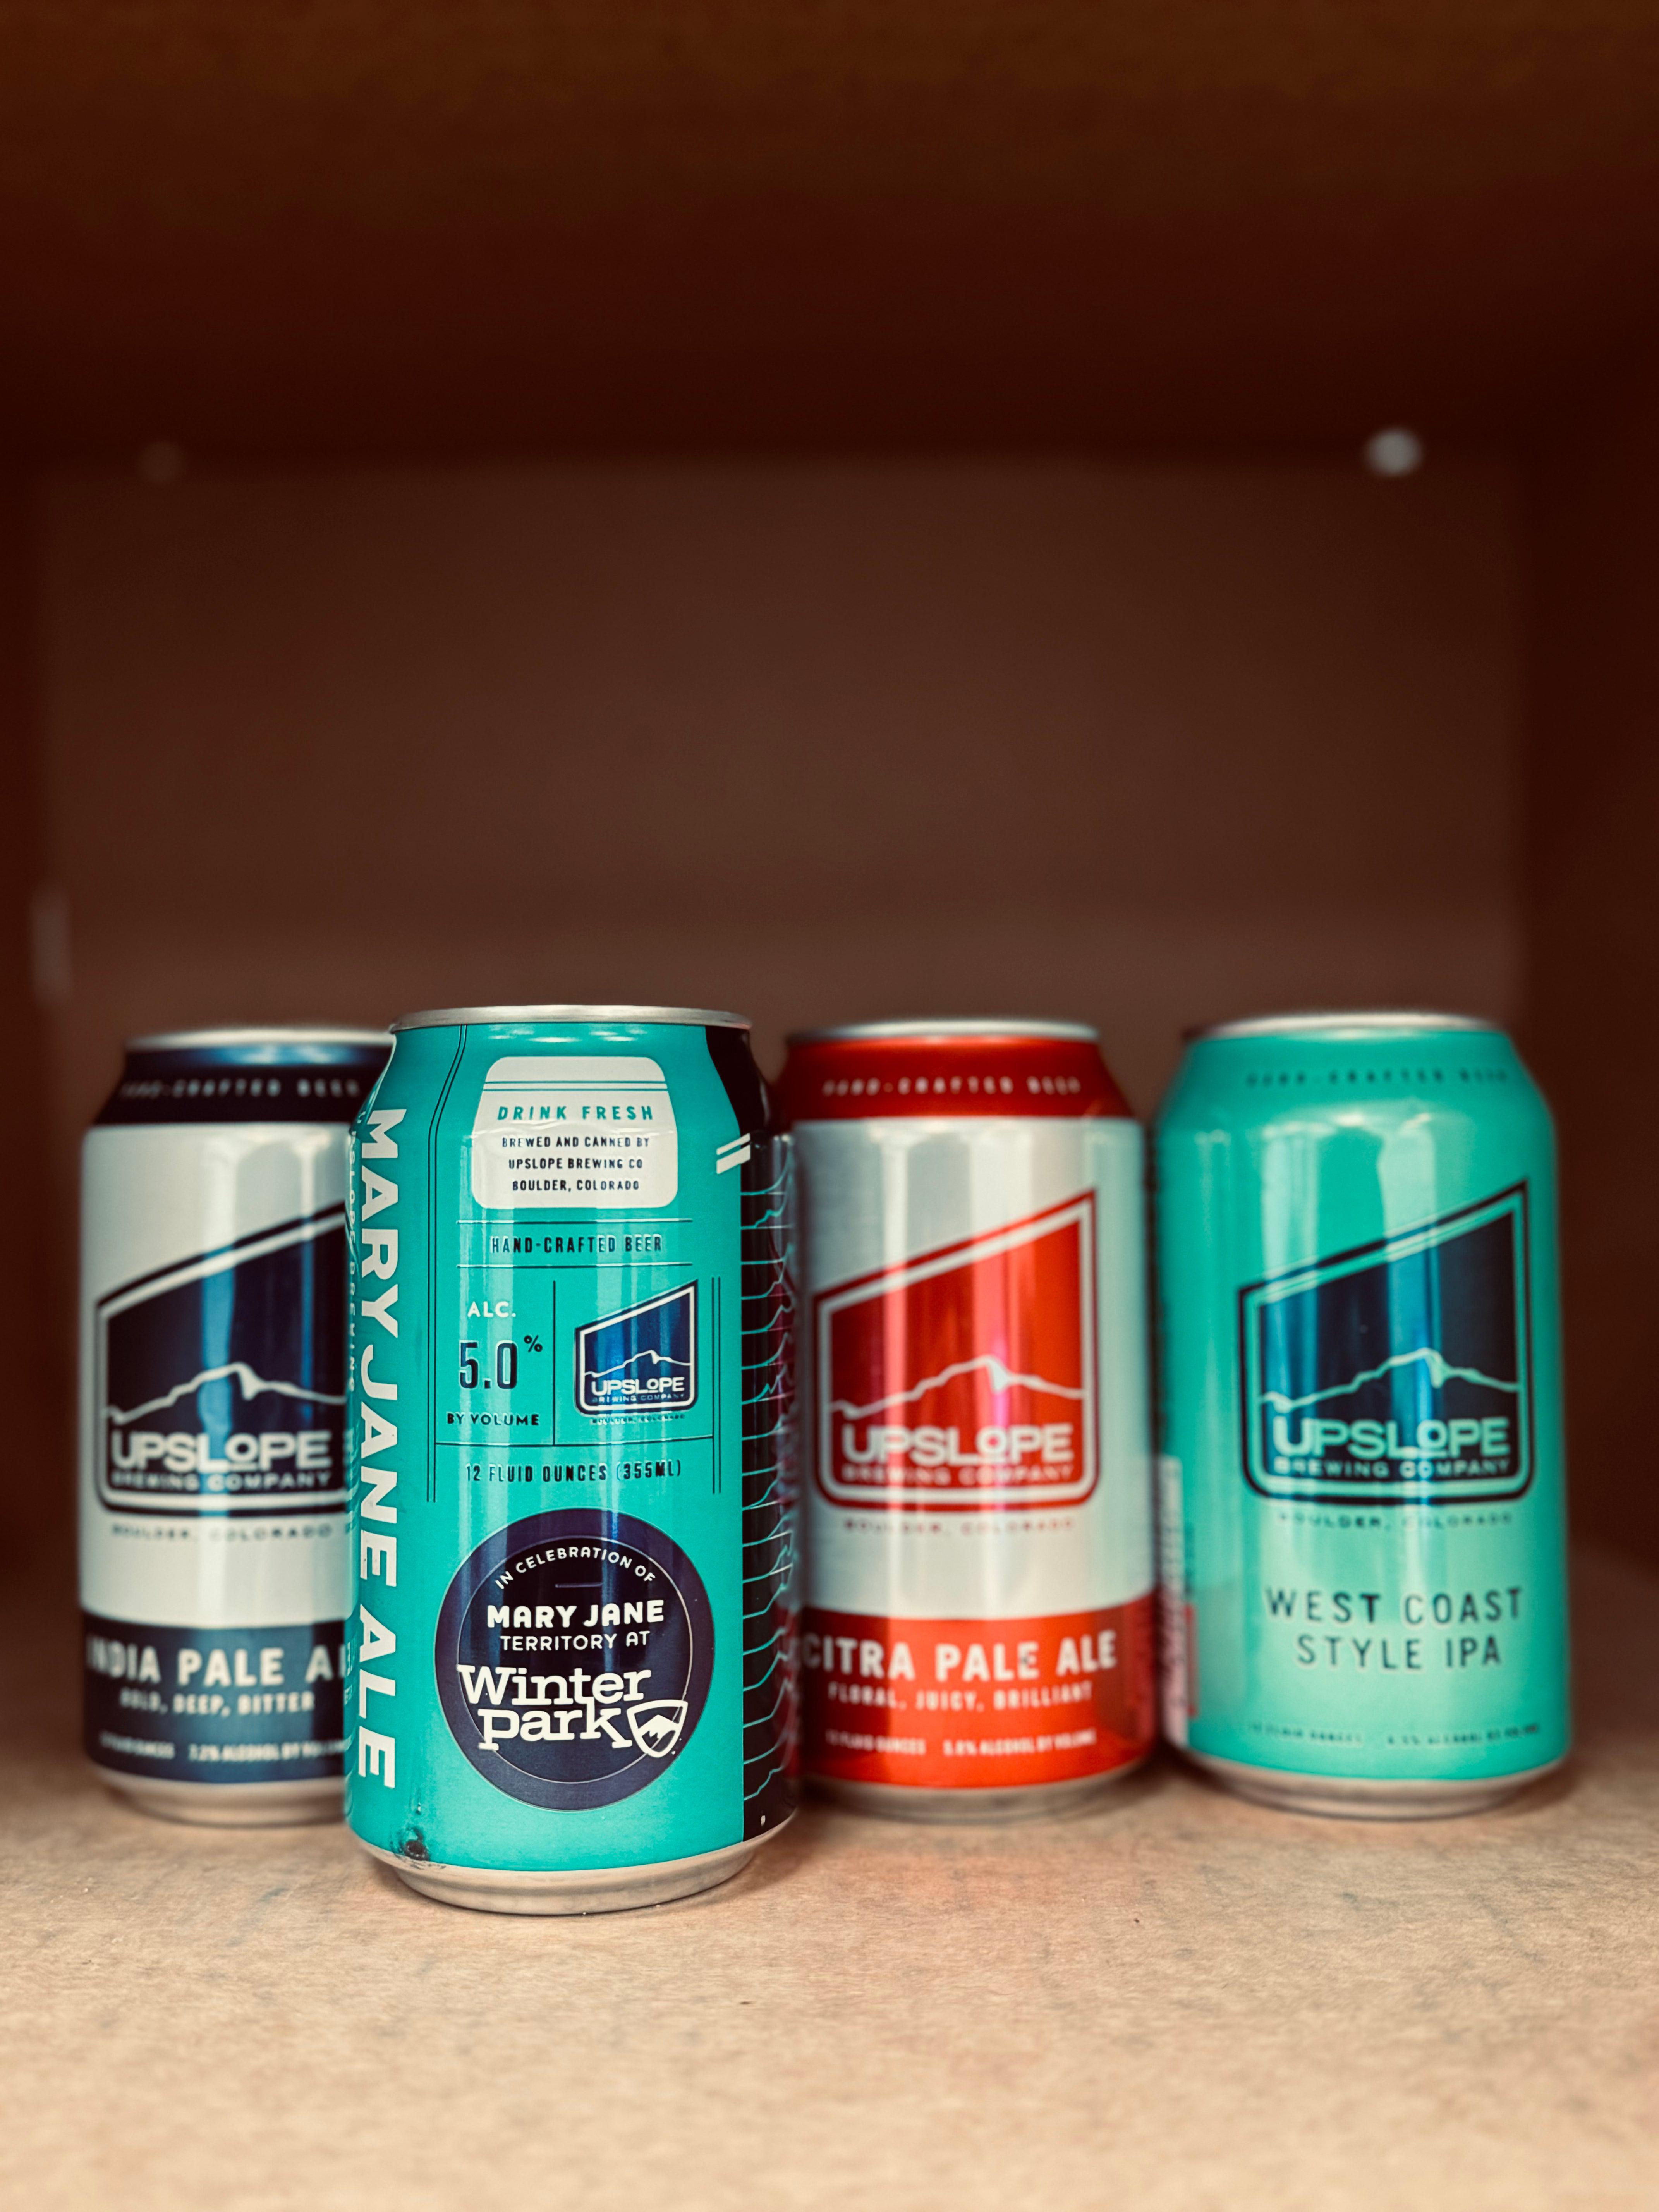 -Upslope- Upslope 🚀 Take Off Set 1-Packs & Cases- Only @ Beer Republic - The best online beer store for American & Canadian craft beer - Buy beer online from the USA and Canada - Bier online kopen - Amerikaans bier kopen - Craft beer store - Craft beer kopen - Amerikanisch bier kaufen - Bier online kaufen - Acheter biere online - IPA - Stout - Porter - New England IPA - Hazy IPA - Imperial Stout - Barrel Aged - Barrel Aged Imperial Stout - Brown - Dark beer - Blond - Blonde - Pilsner - Lager - Wheat - Weize